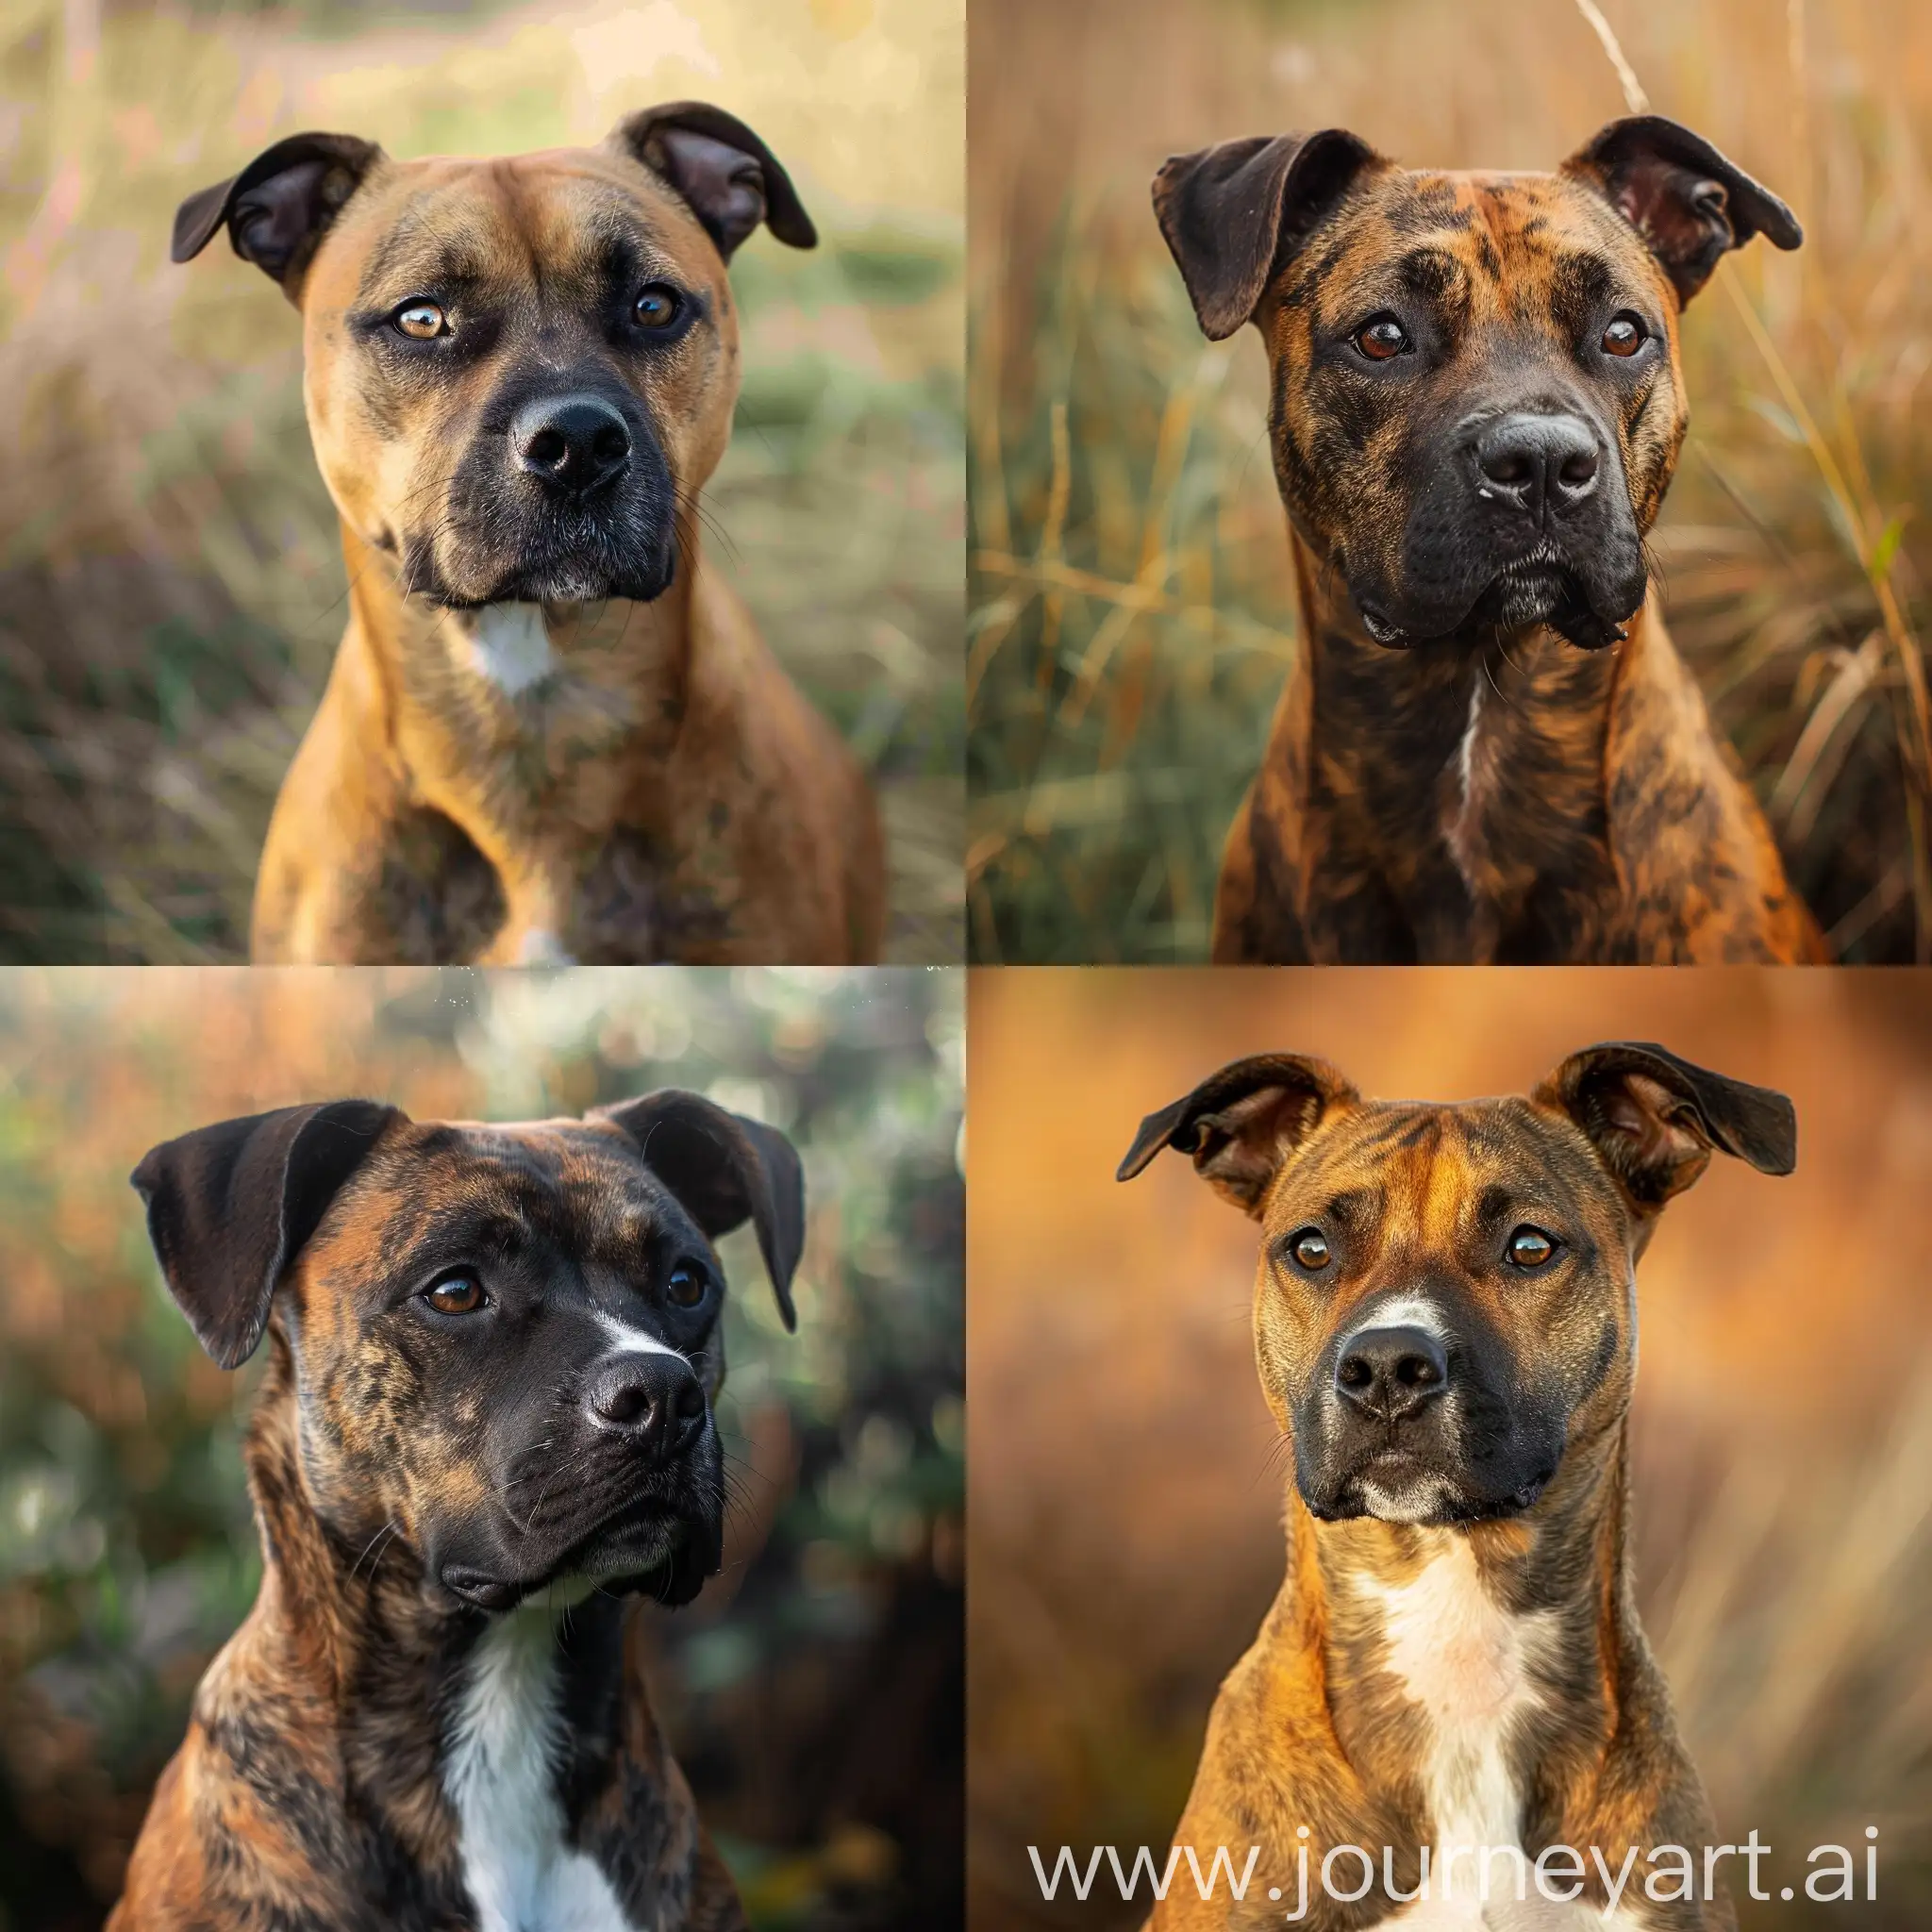 give a photo of a cross dog between staffy and épagneul with the color of a boxer